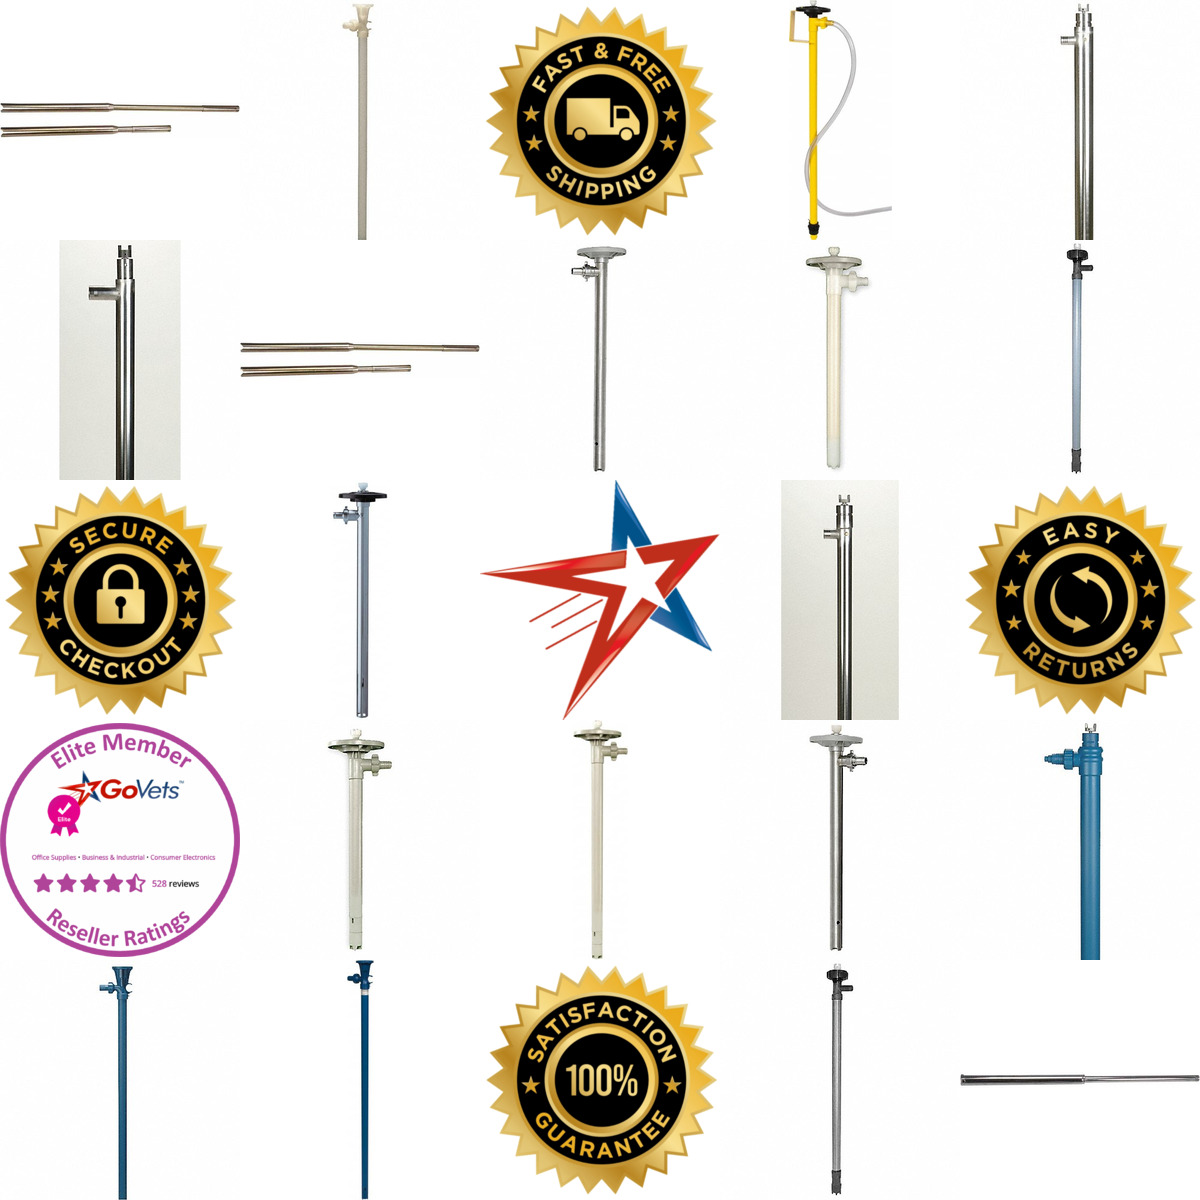 A selection of Drum Pump Tubes products on GoVets